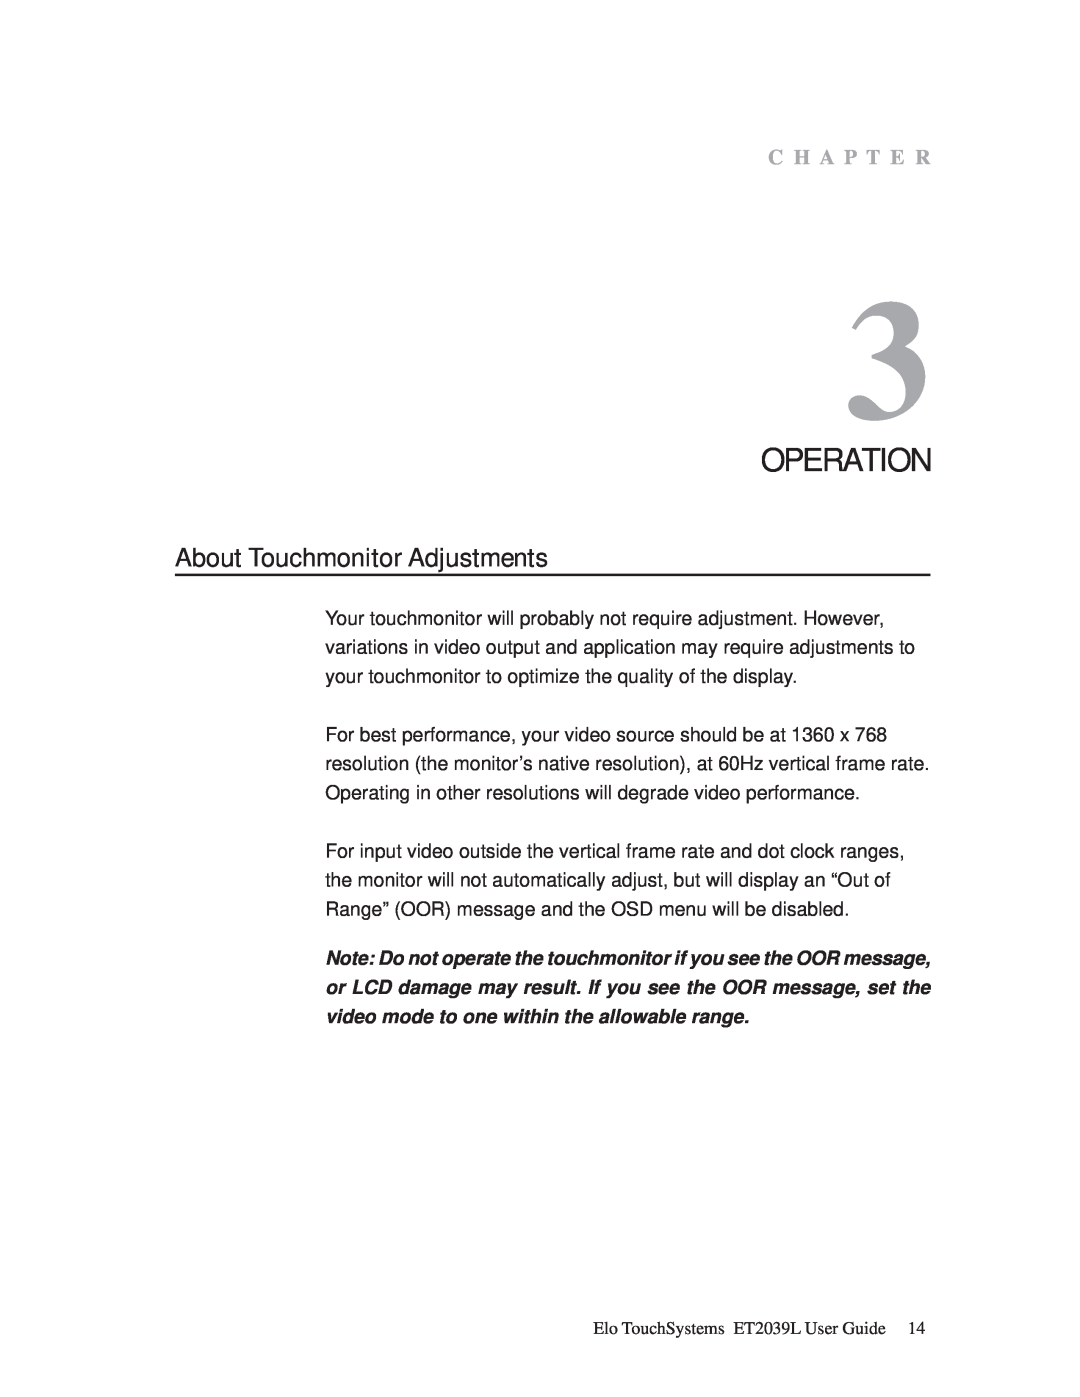 Elo TouchSystems ET2039L manual Operation, About Touchmonitor Adjustments, C H A P T E R 